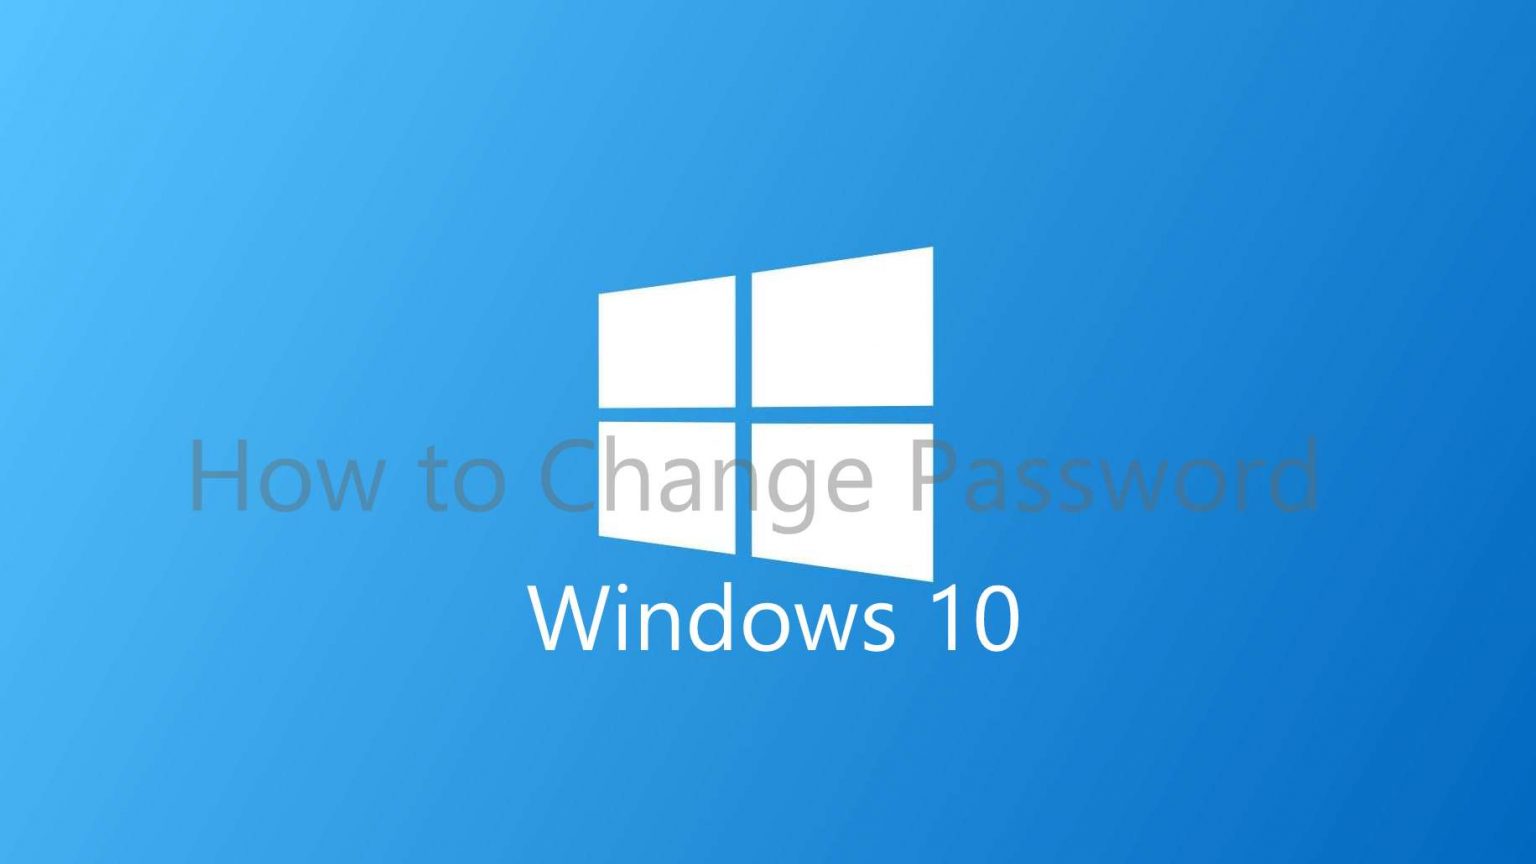 download windows 10 for free youtube